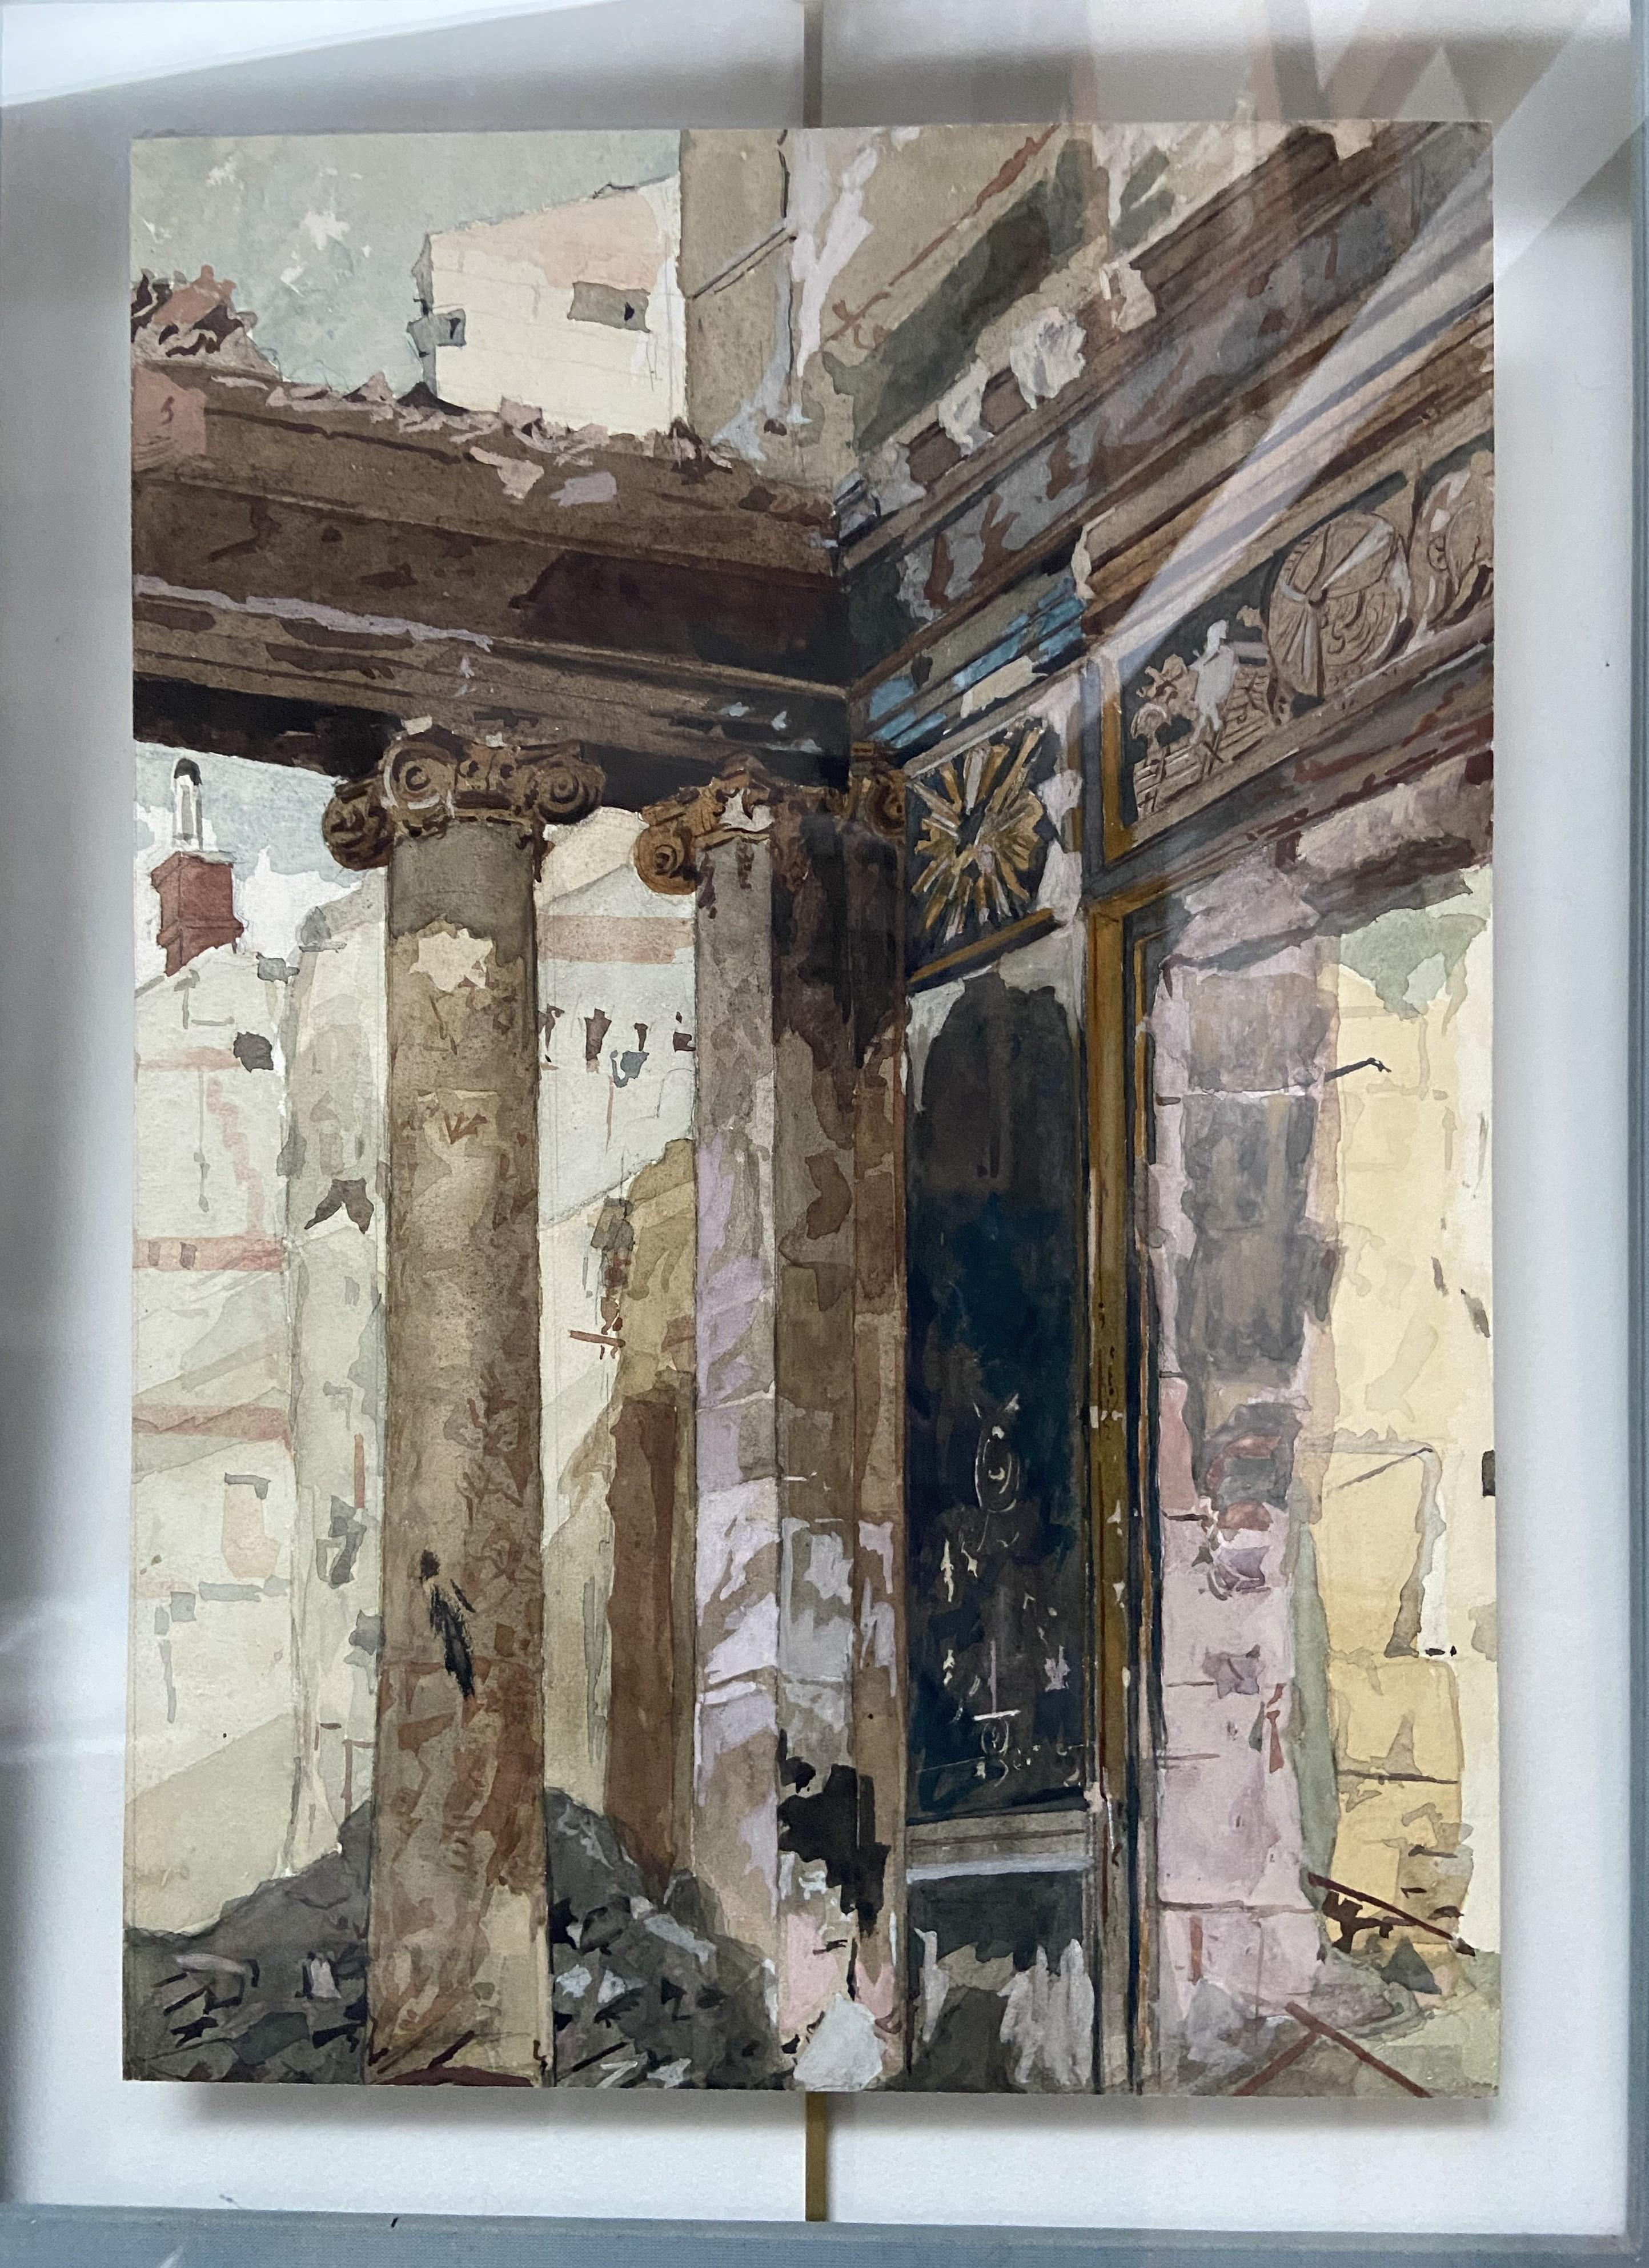 20th century French school, Colonnade in ruins, watercolor - Post-Modern Art by Unknown